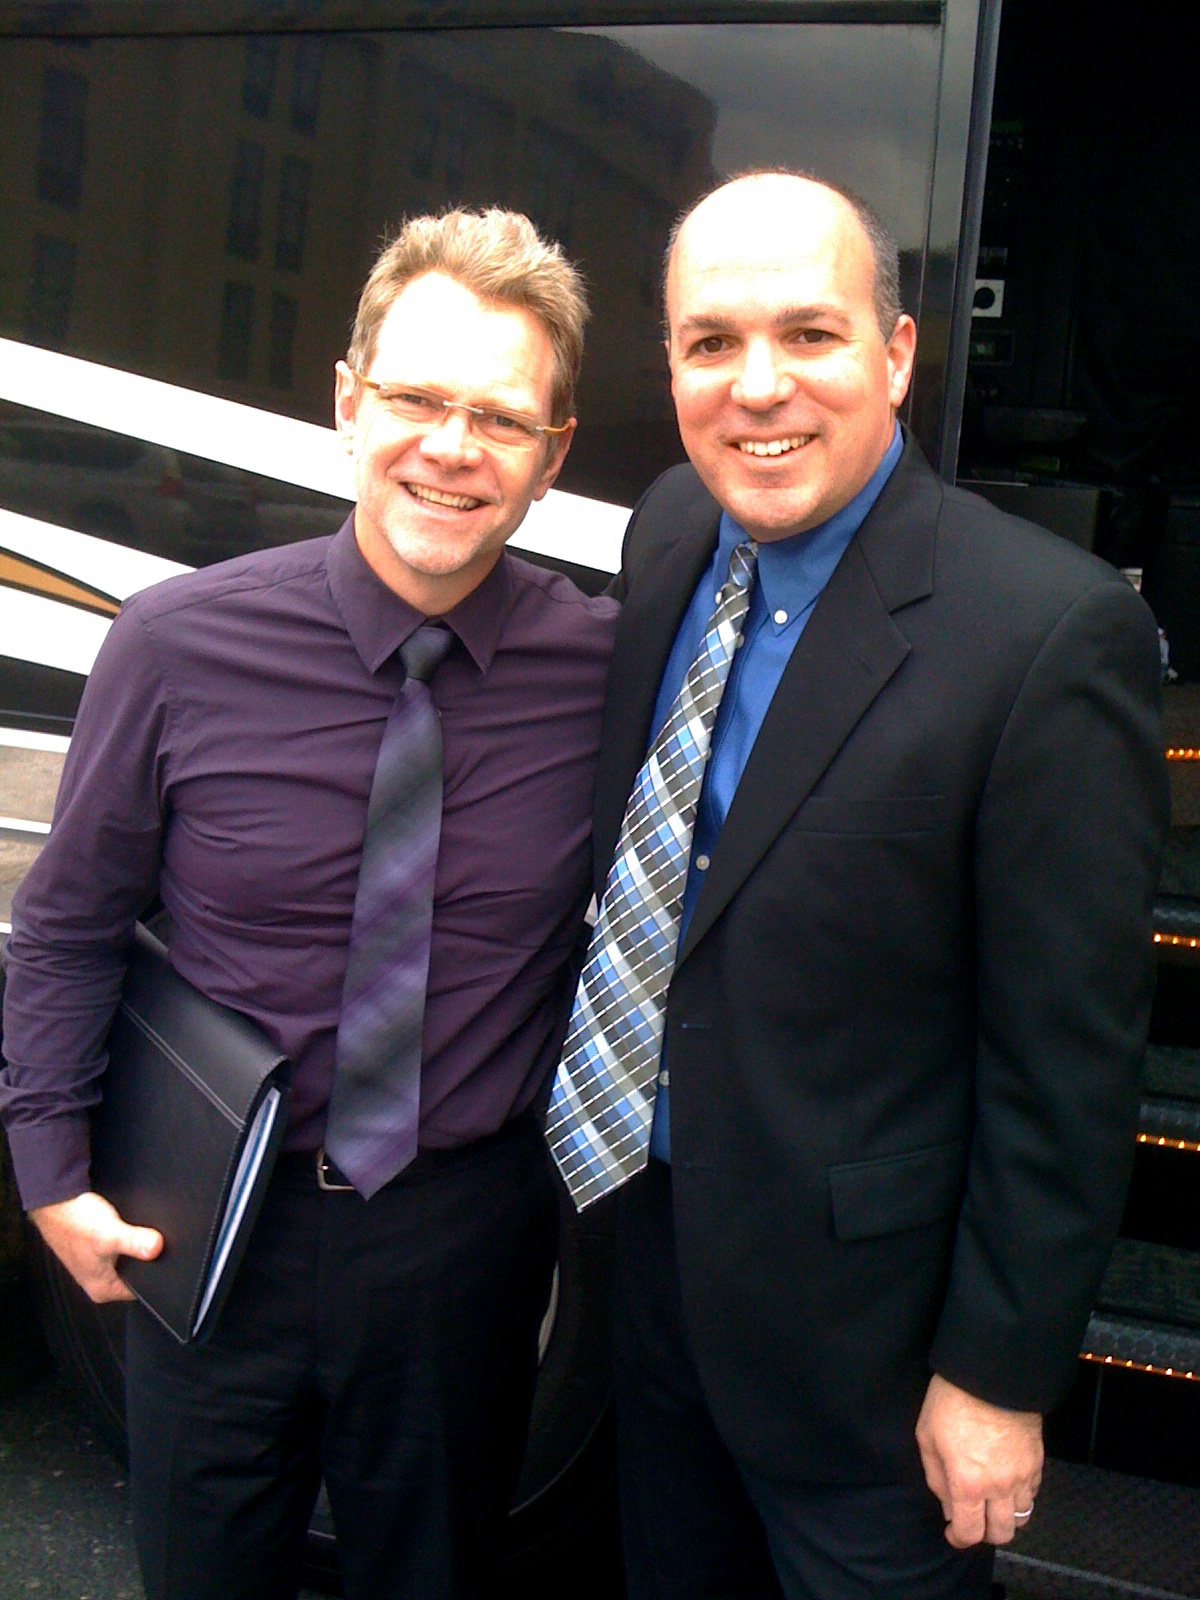 Steven Curtis Chapman was the commencement speaker at Anderson University